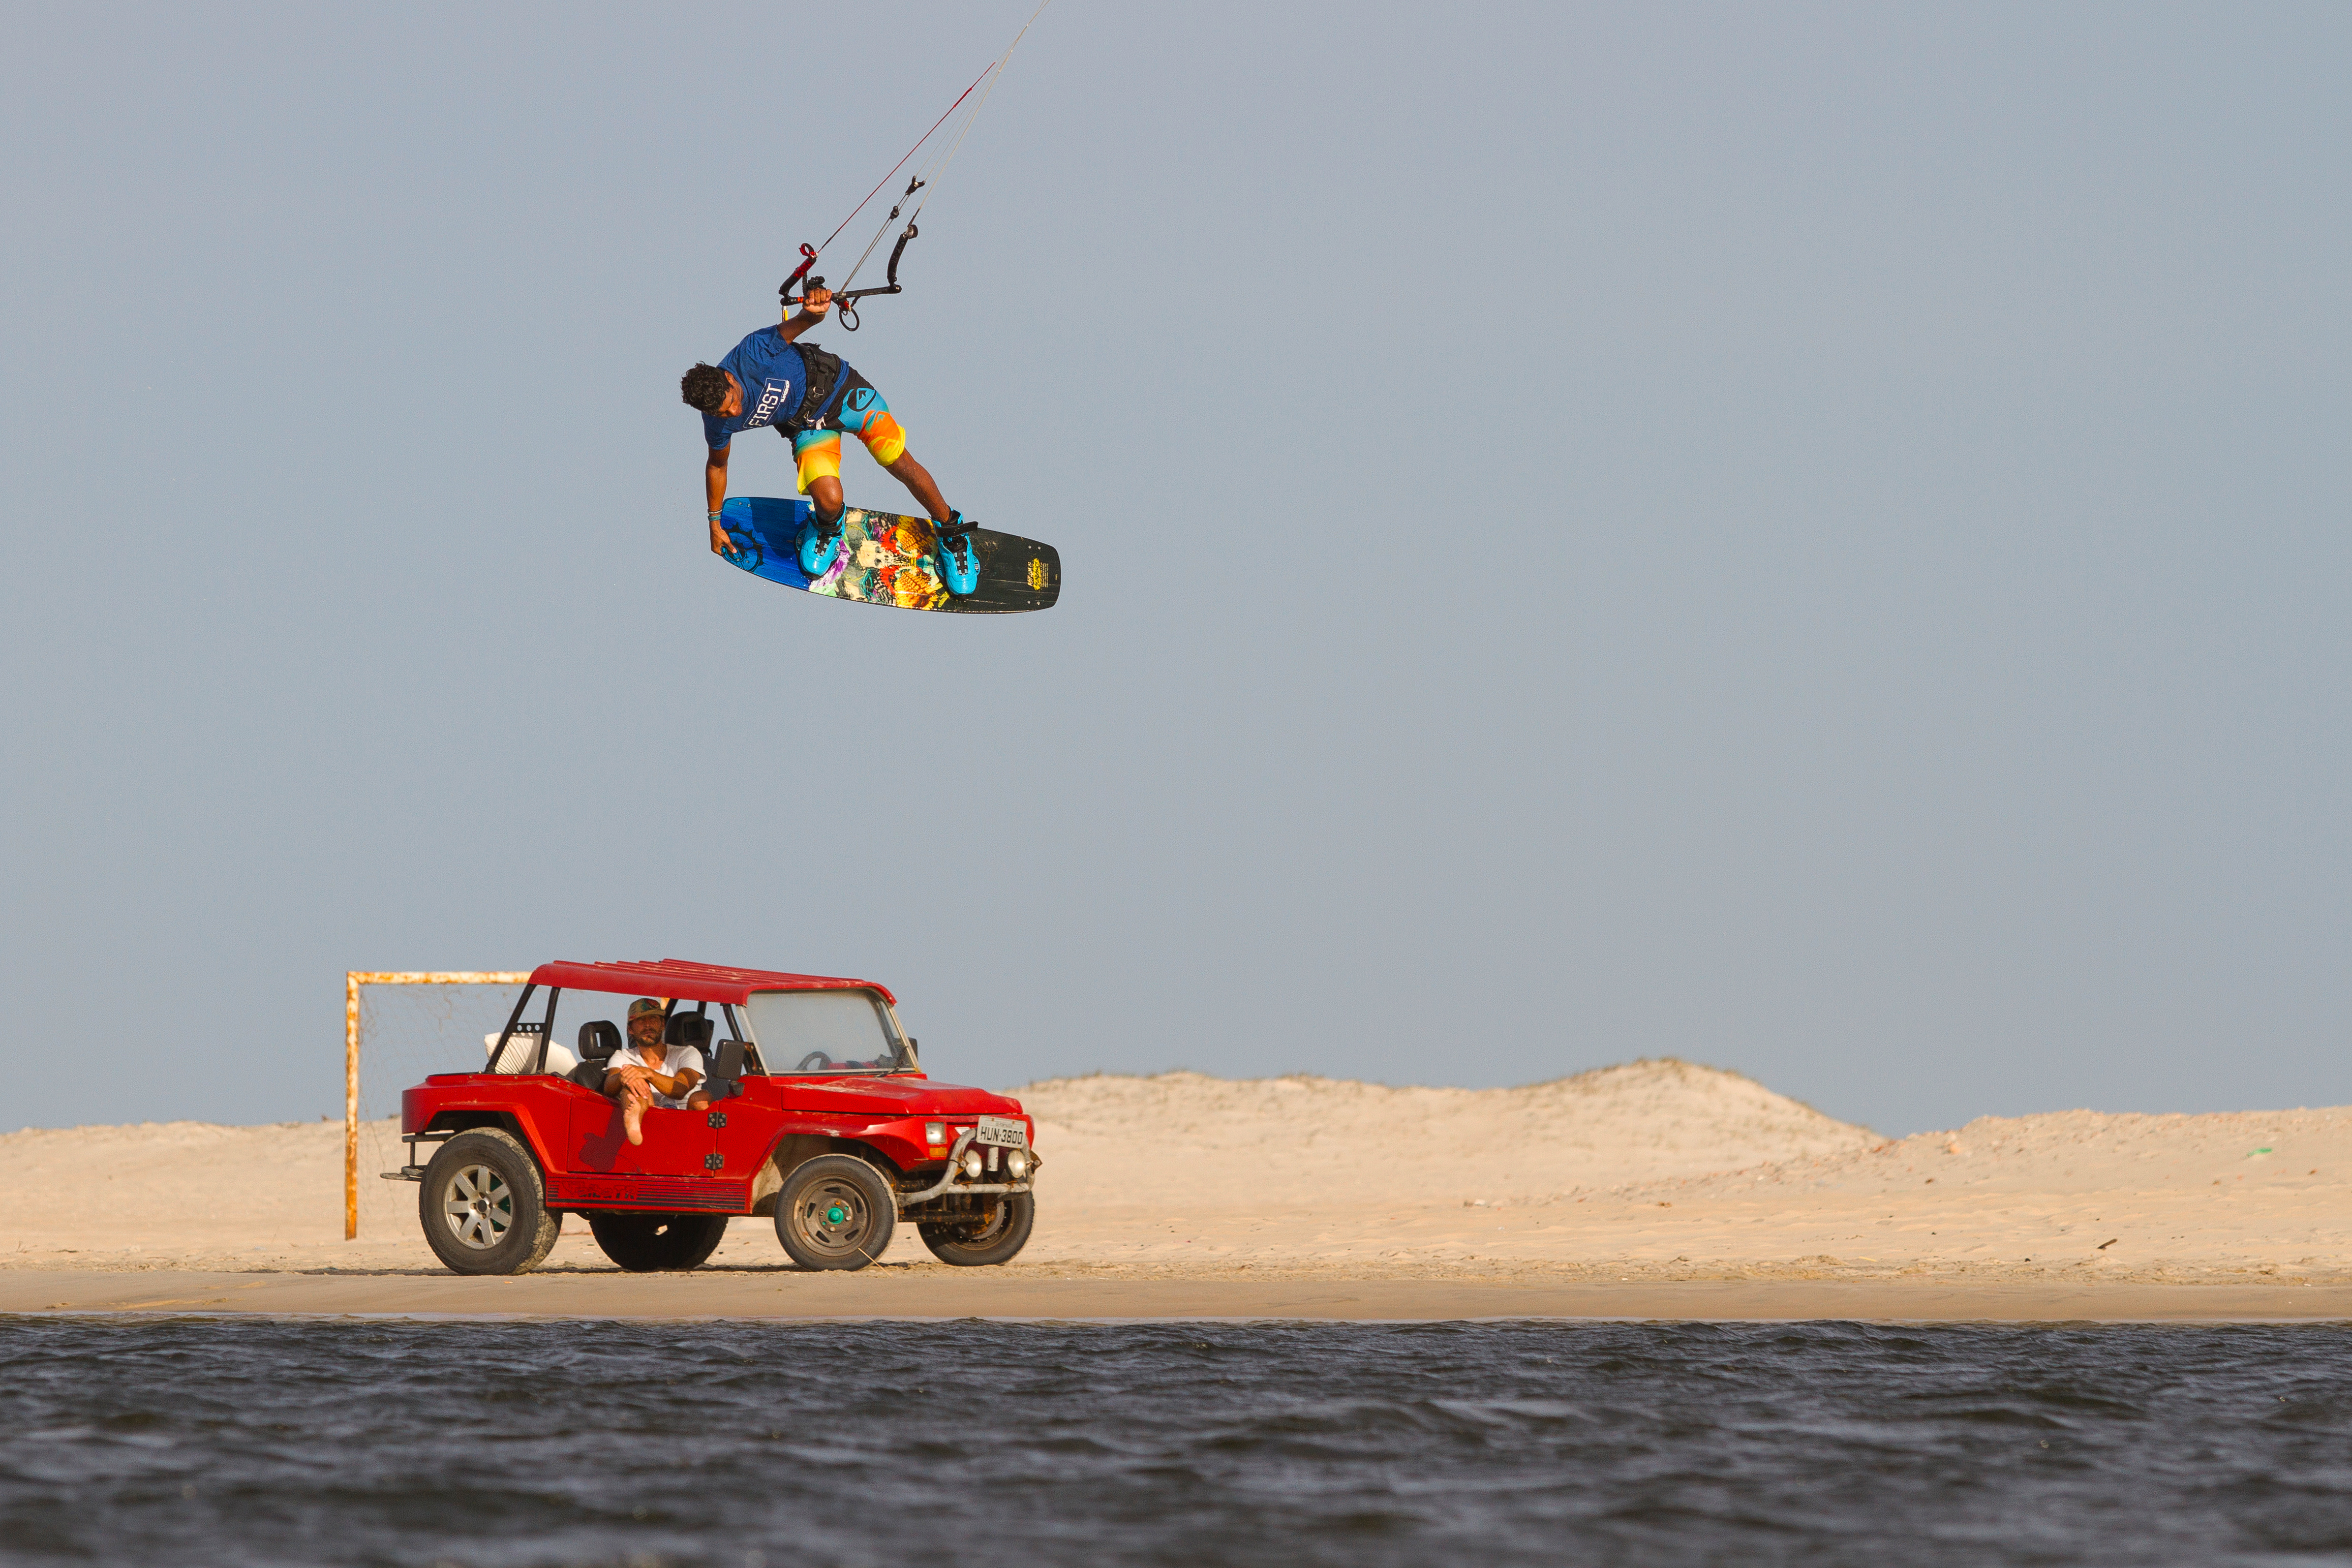 kitesurf wallpaper image - Victor Hays with a tail grab over a Brazilian buggy - Slingshot kiteboarding - in resolution: Original 4627 X 3085